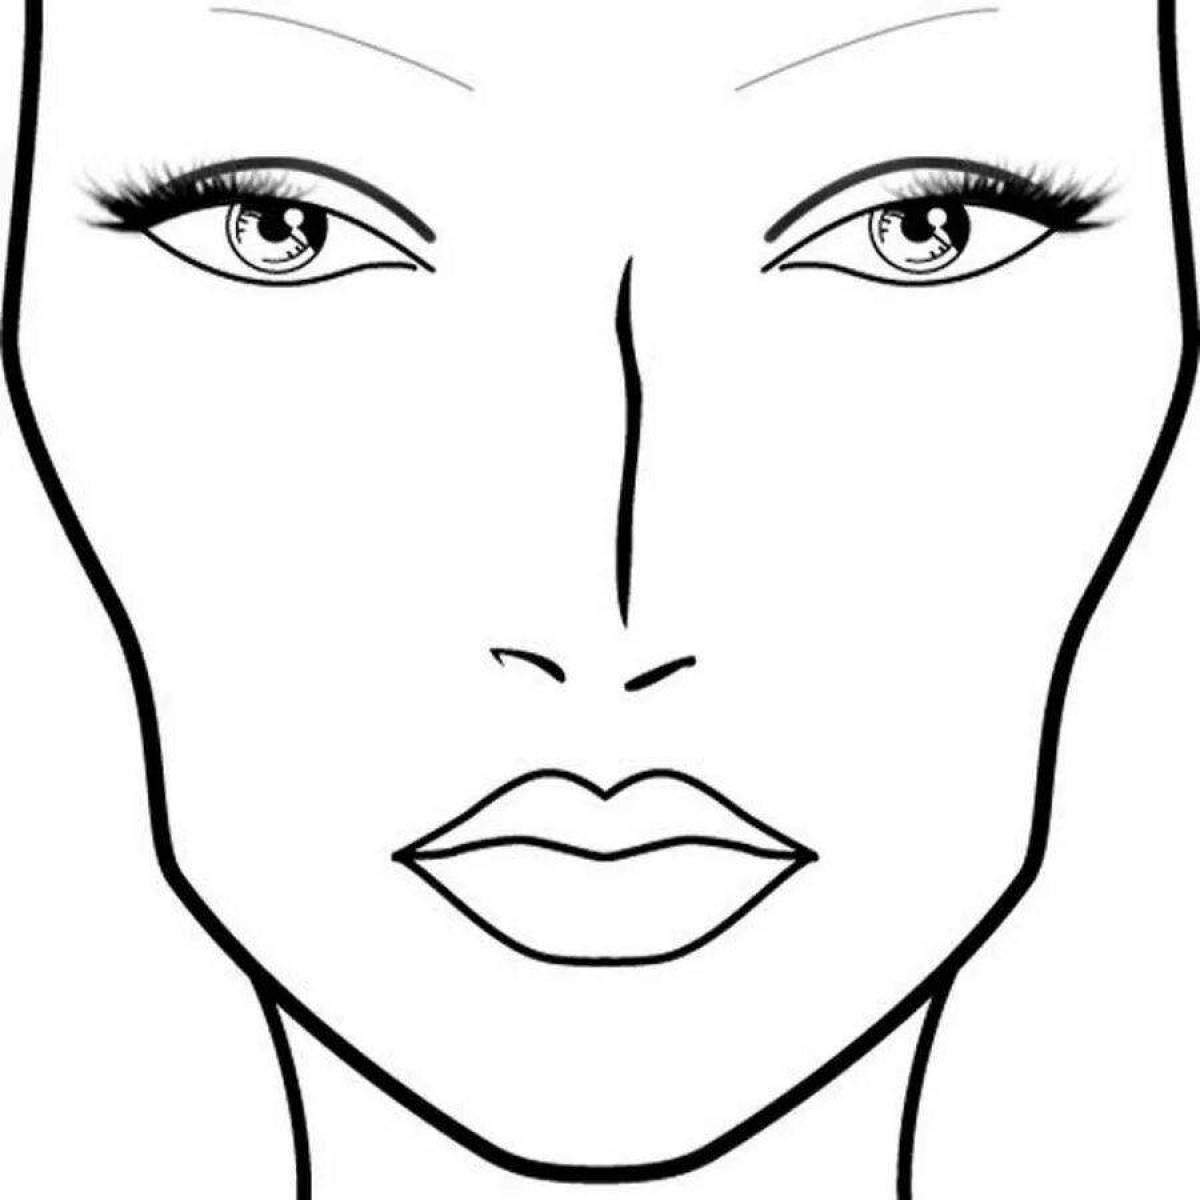 Great do-it-yourself makeup coloring book